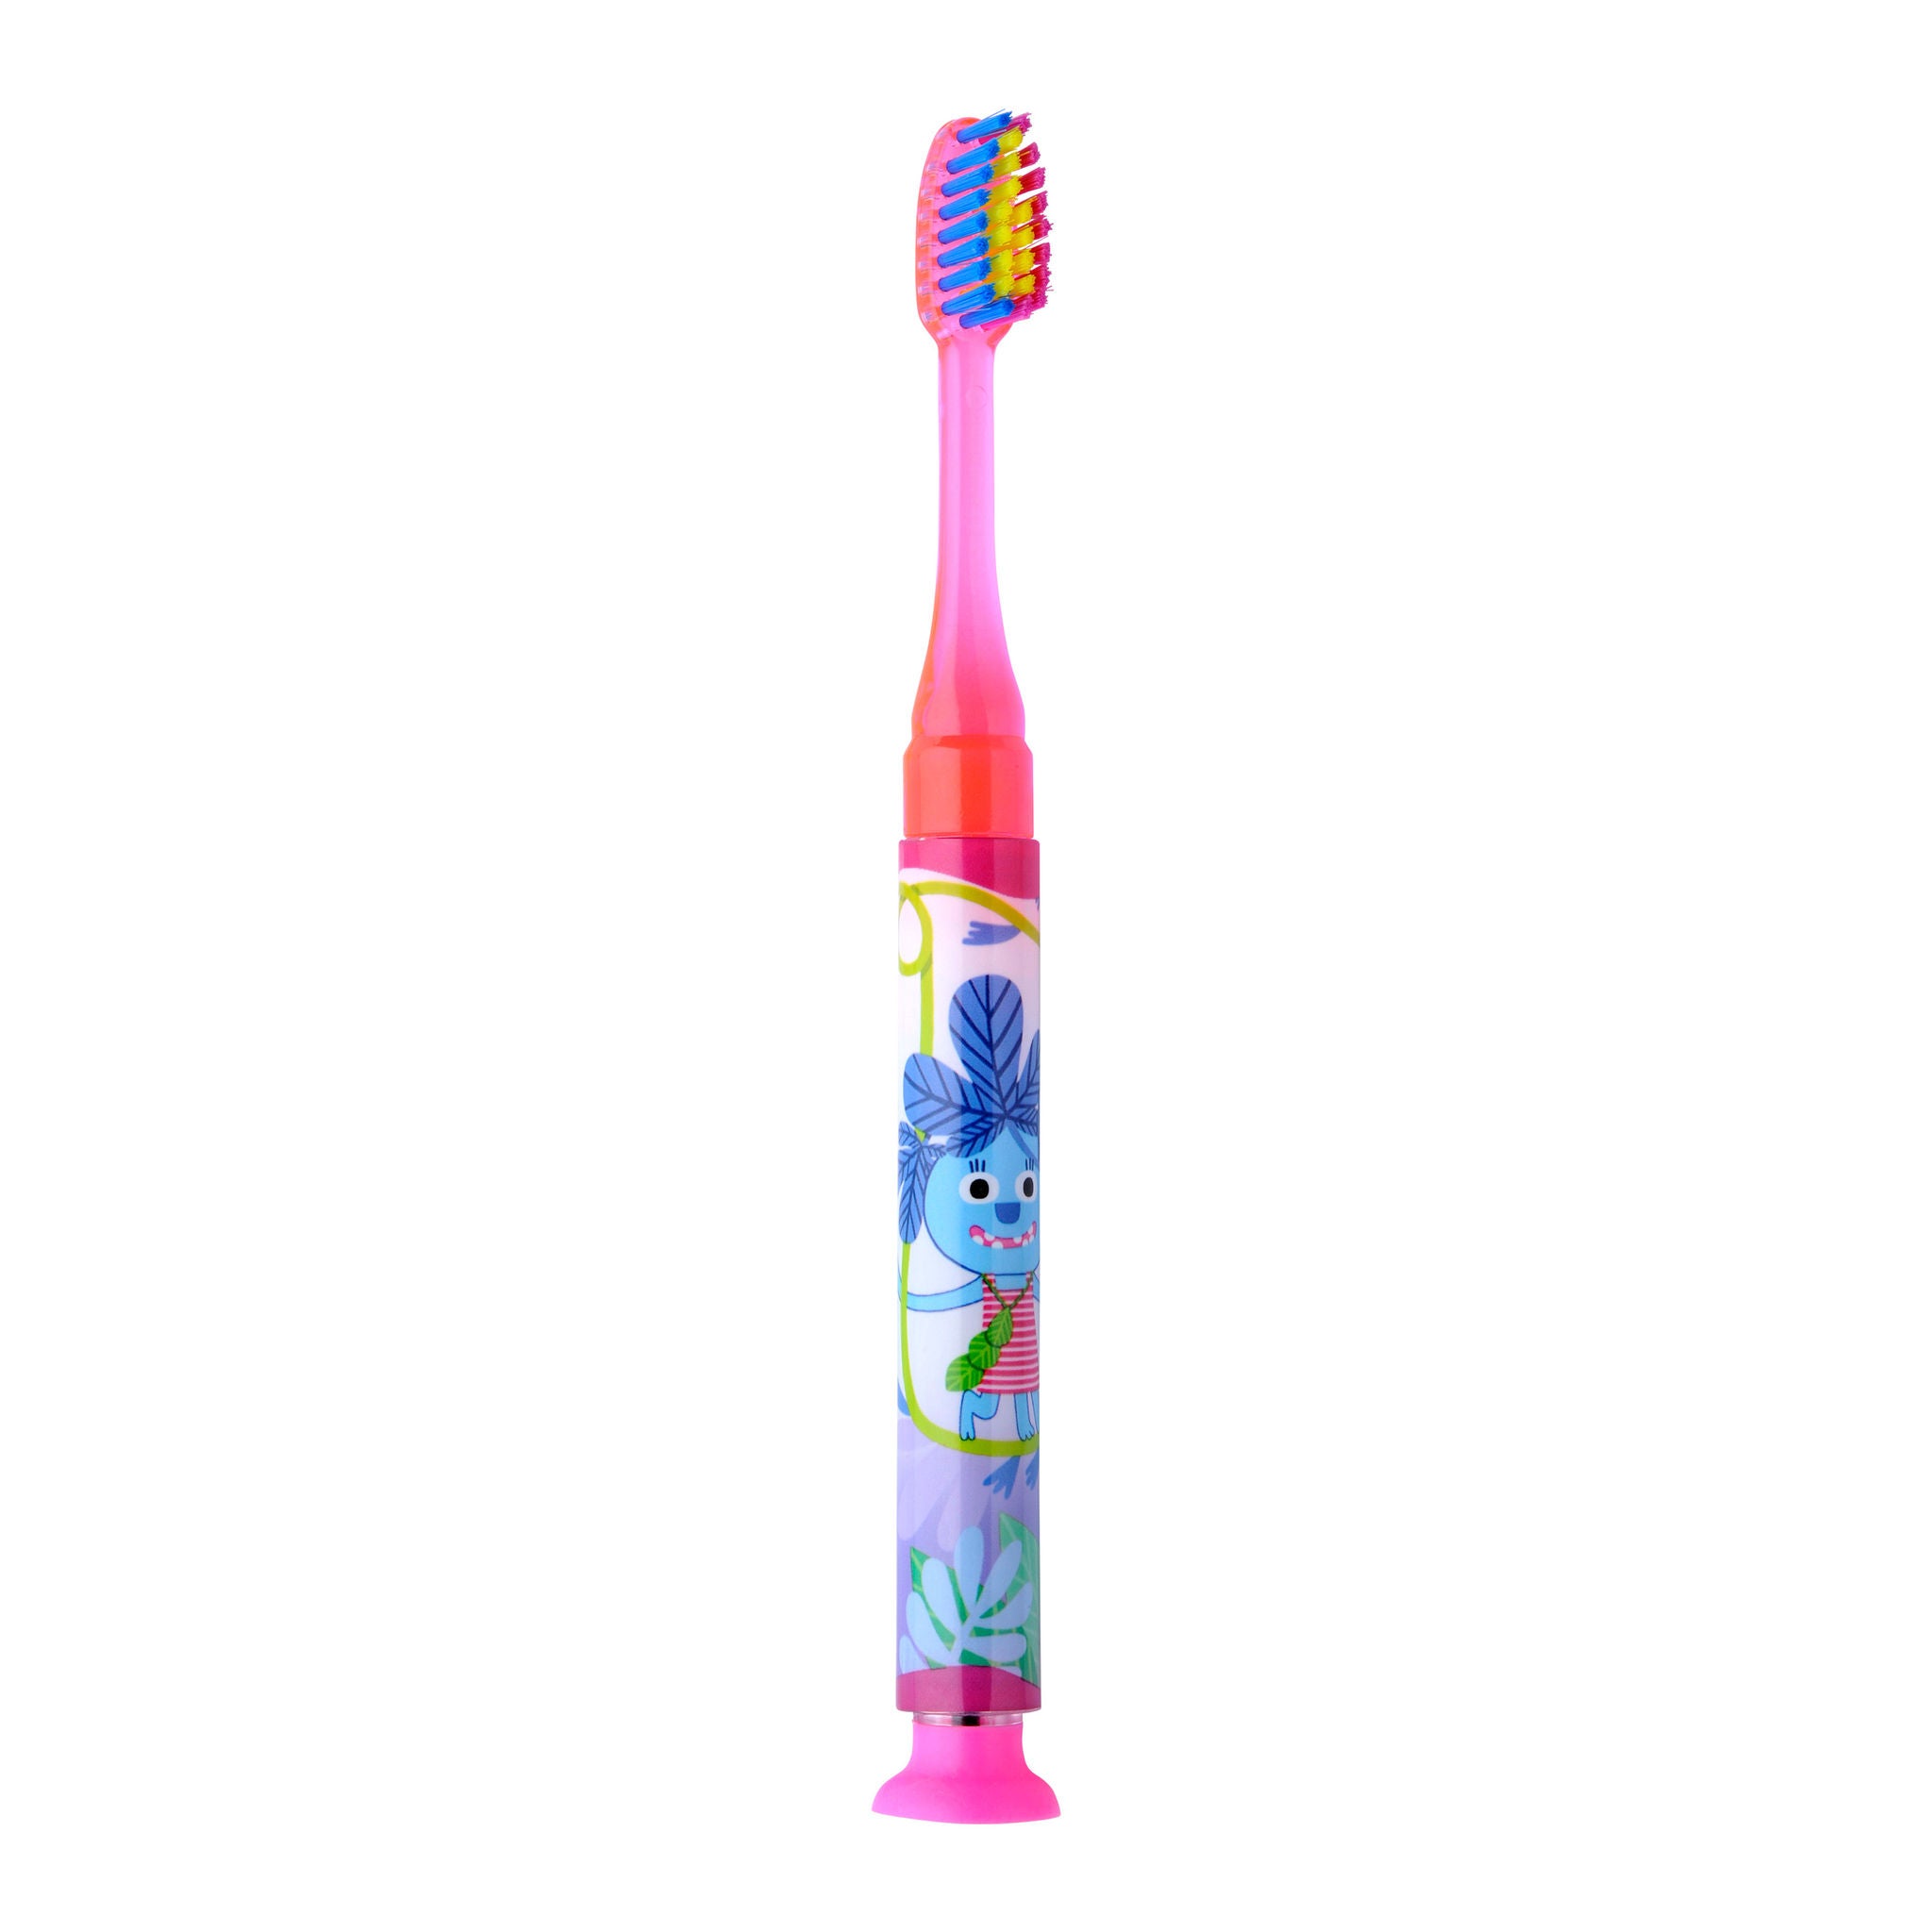 903M2-PINK-GUM-LIGHT-UP-TOOTHBRUSHES-PINK-COMPACT-SOFT-N5.jpg